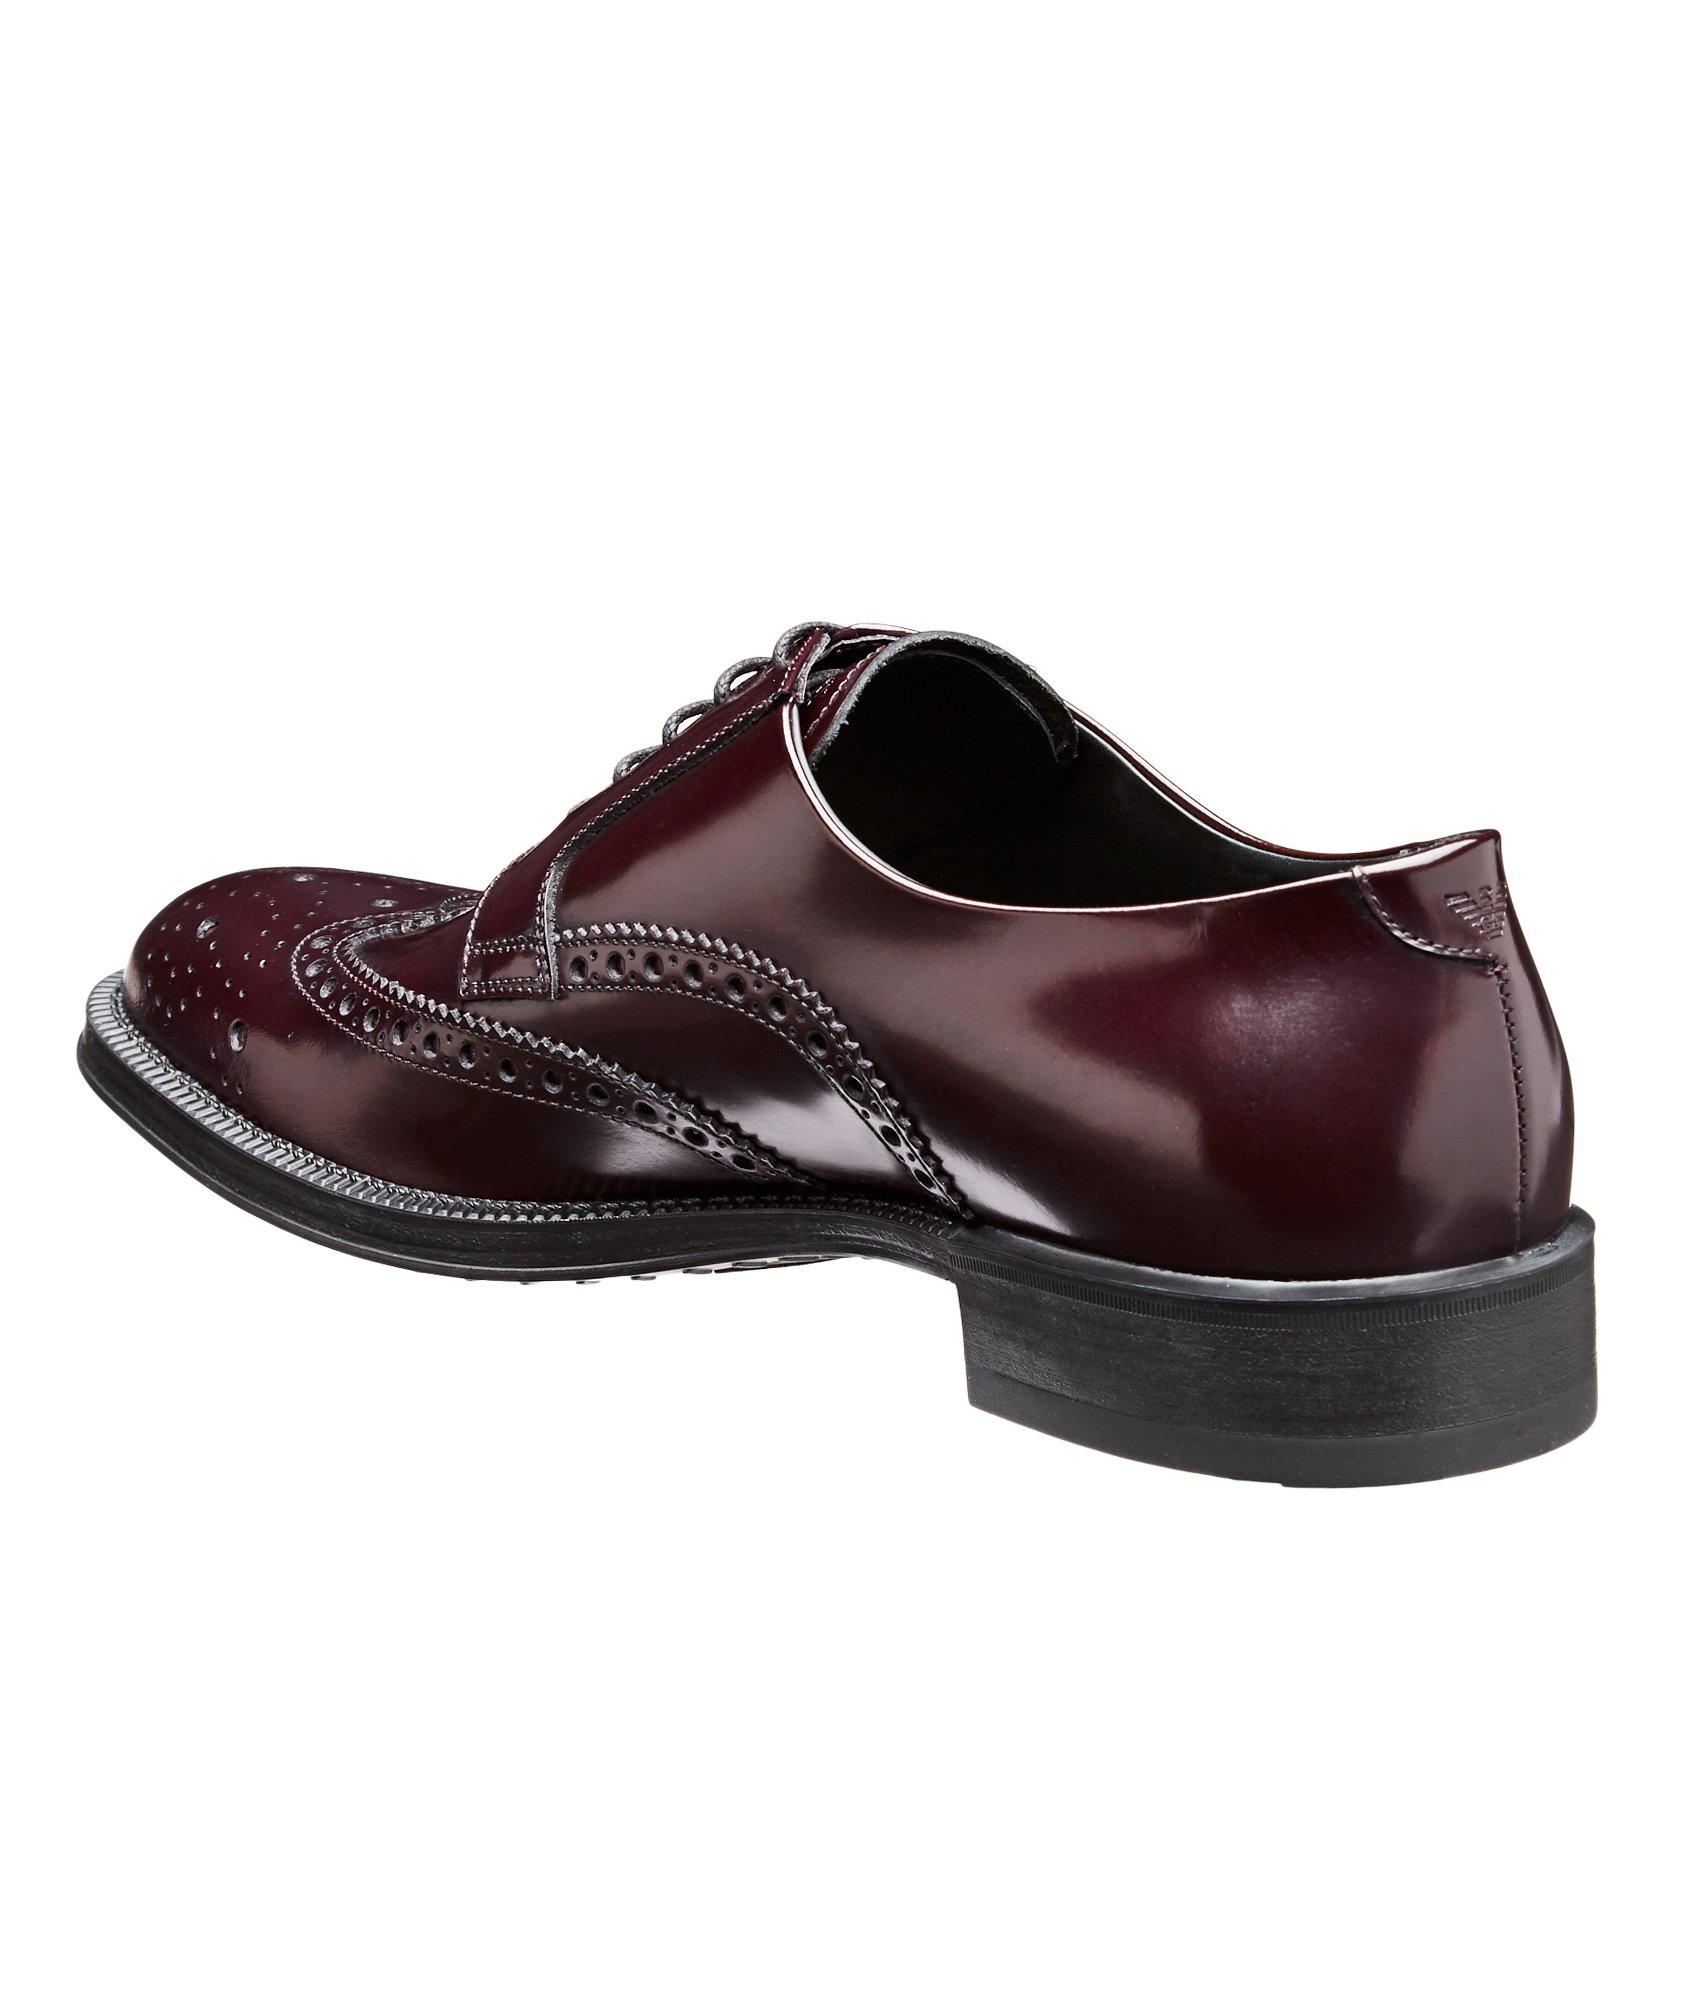 Leather Wingtip Brogues image 1